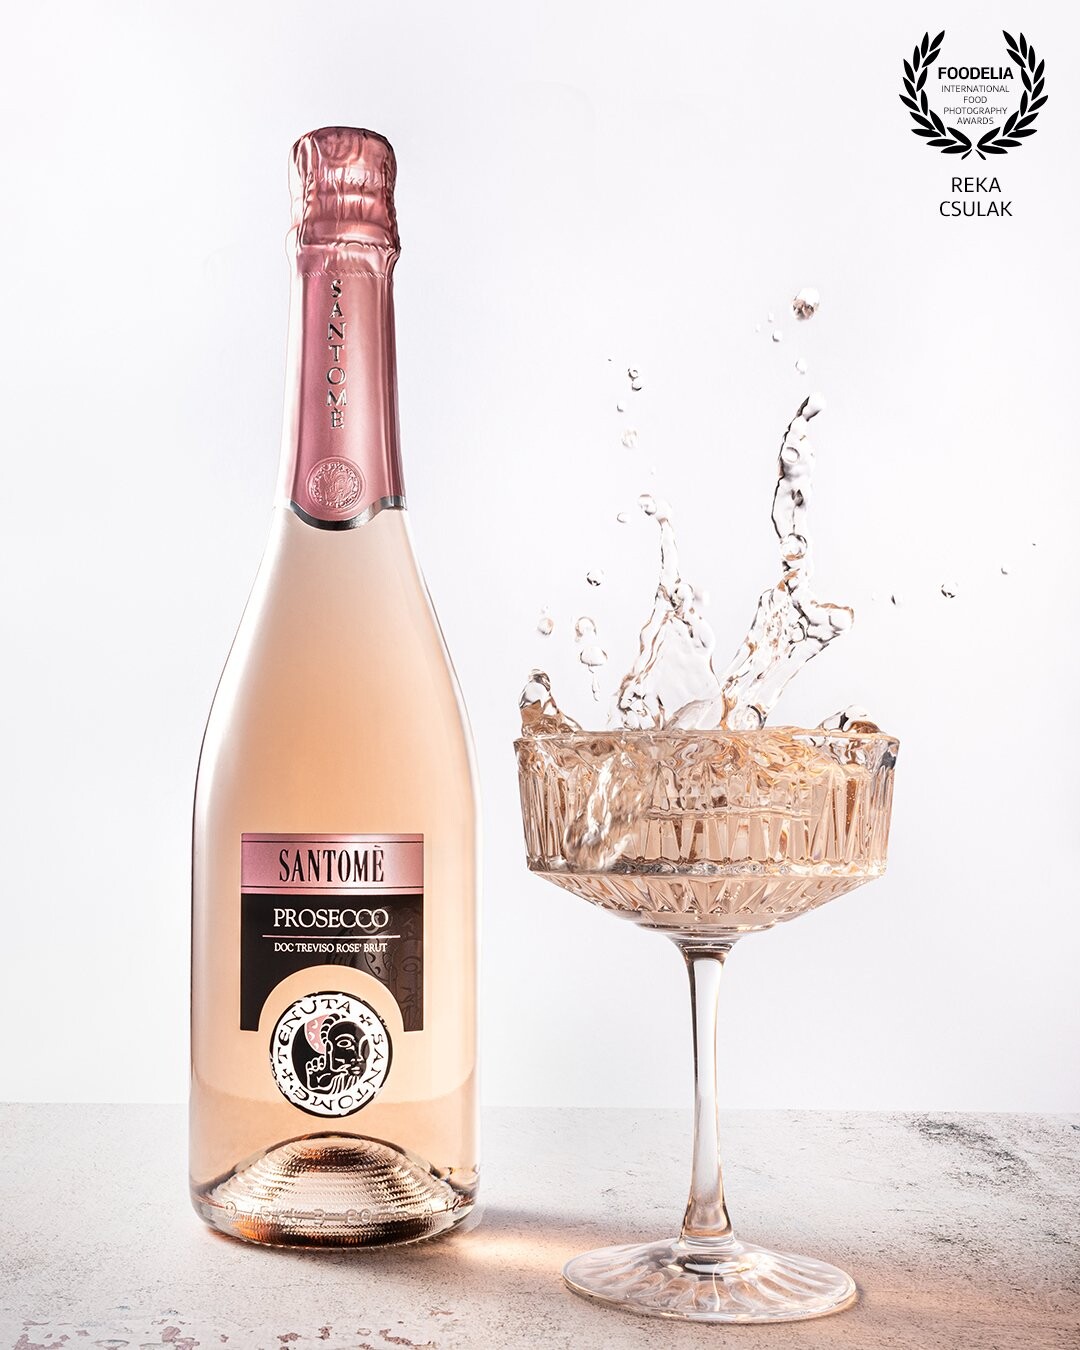 Splash action with the prosecco product from the client's store. Simple styling and environment with eye-catching action-details.